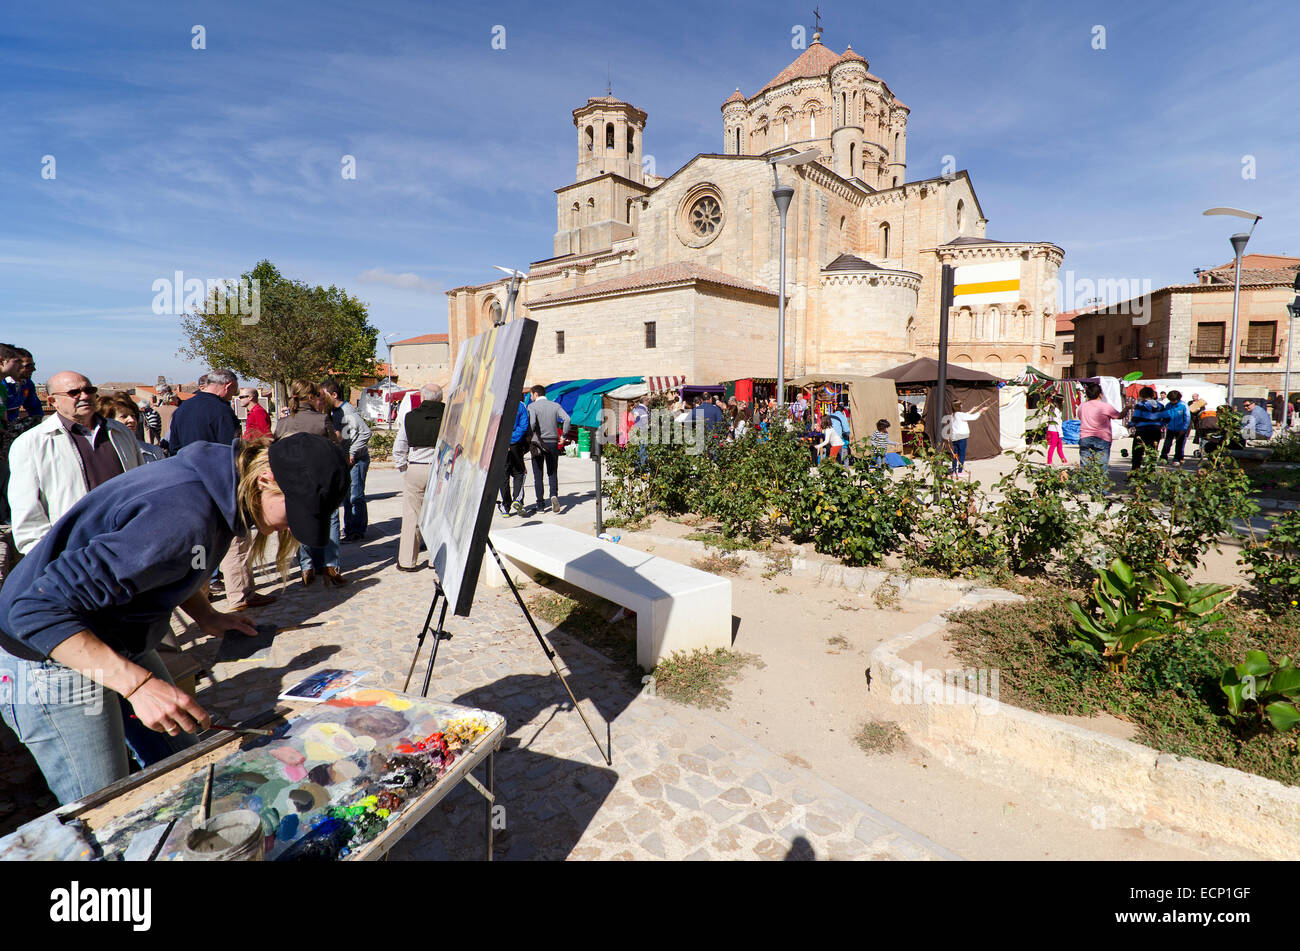 TORO (ZAMORA), SPAIN - OCTOBER 13, 2012: An unidentified contestant in the Plein Aire Painting contest works on a painting of th Stock Photo